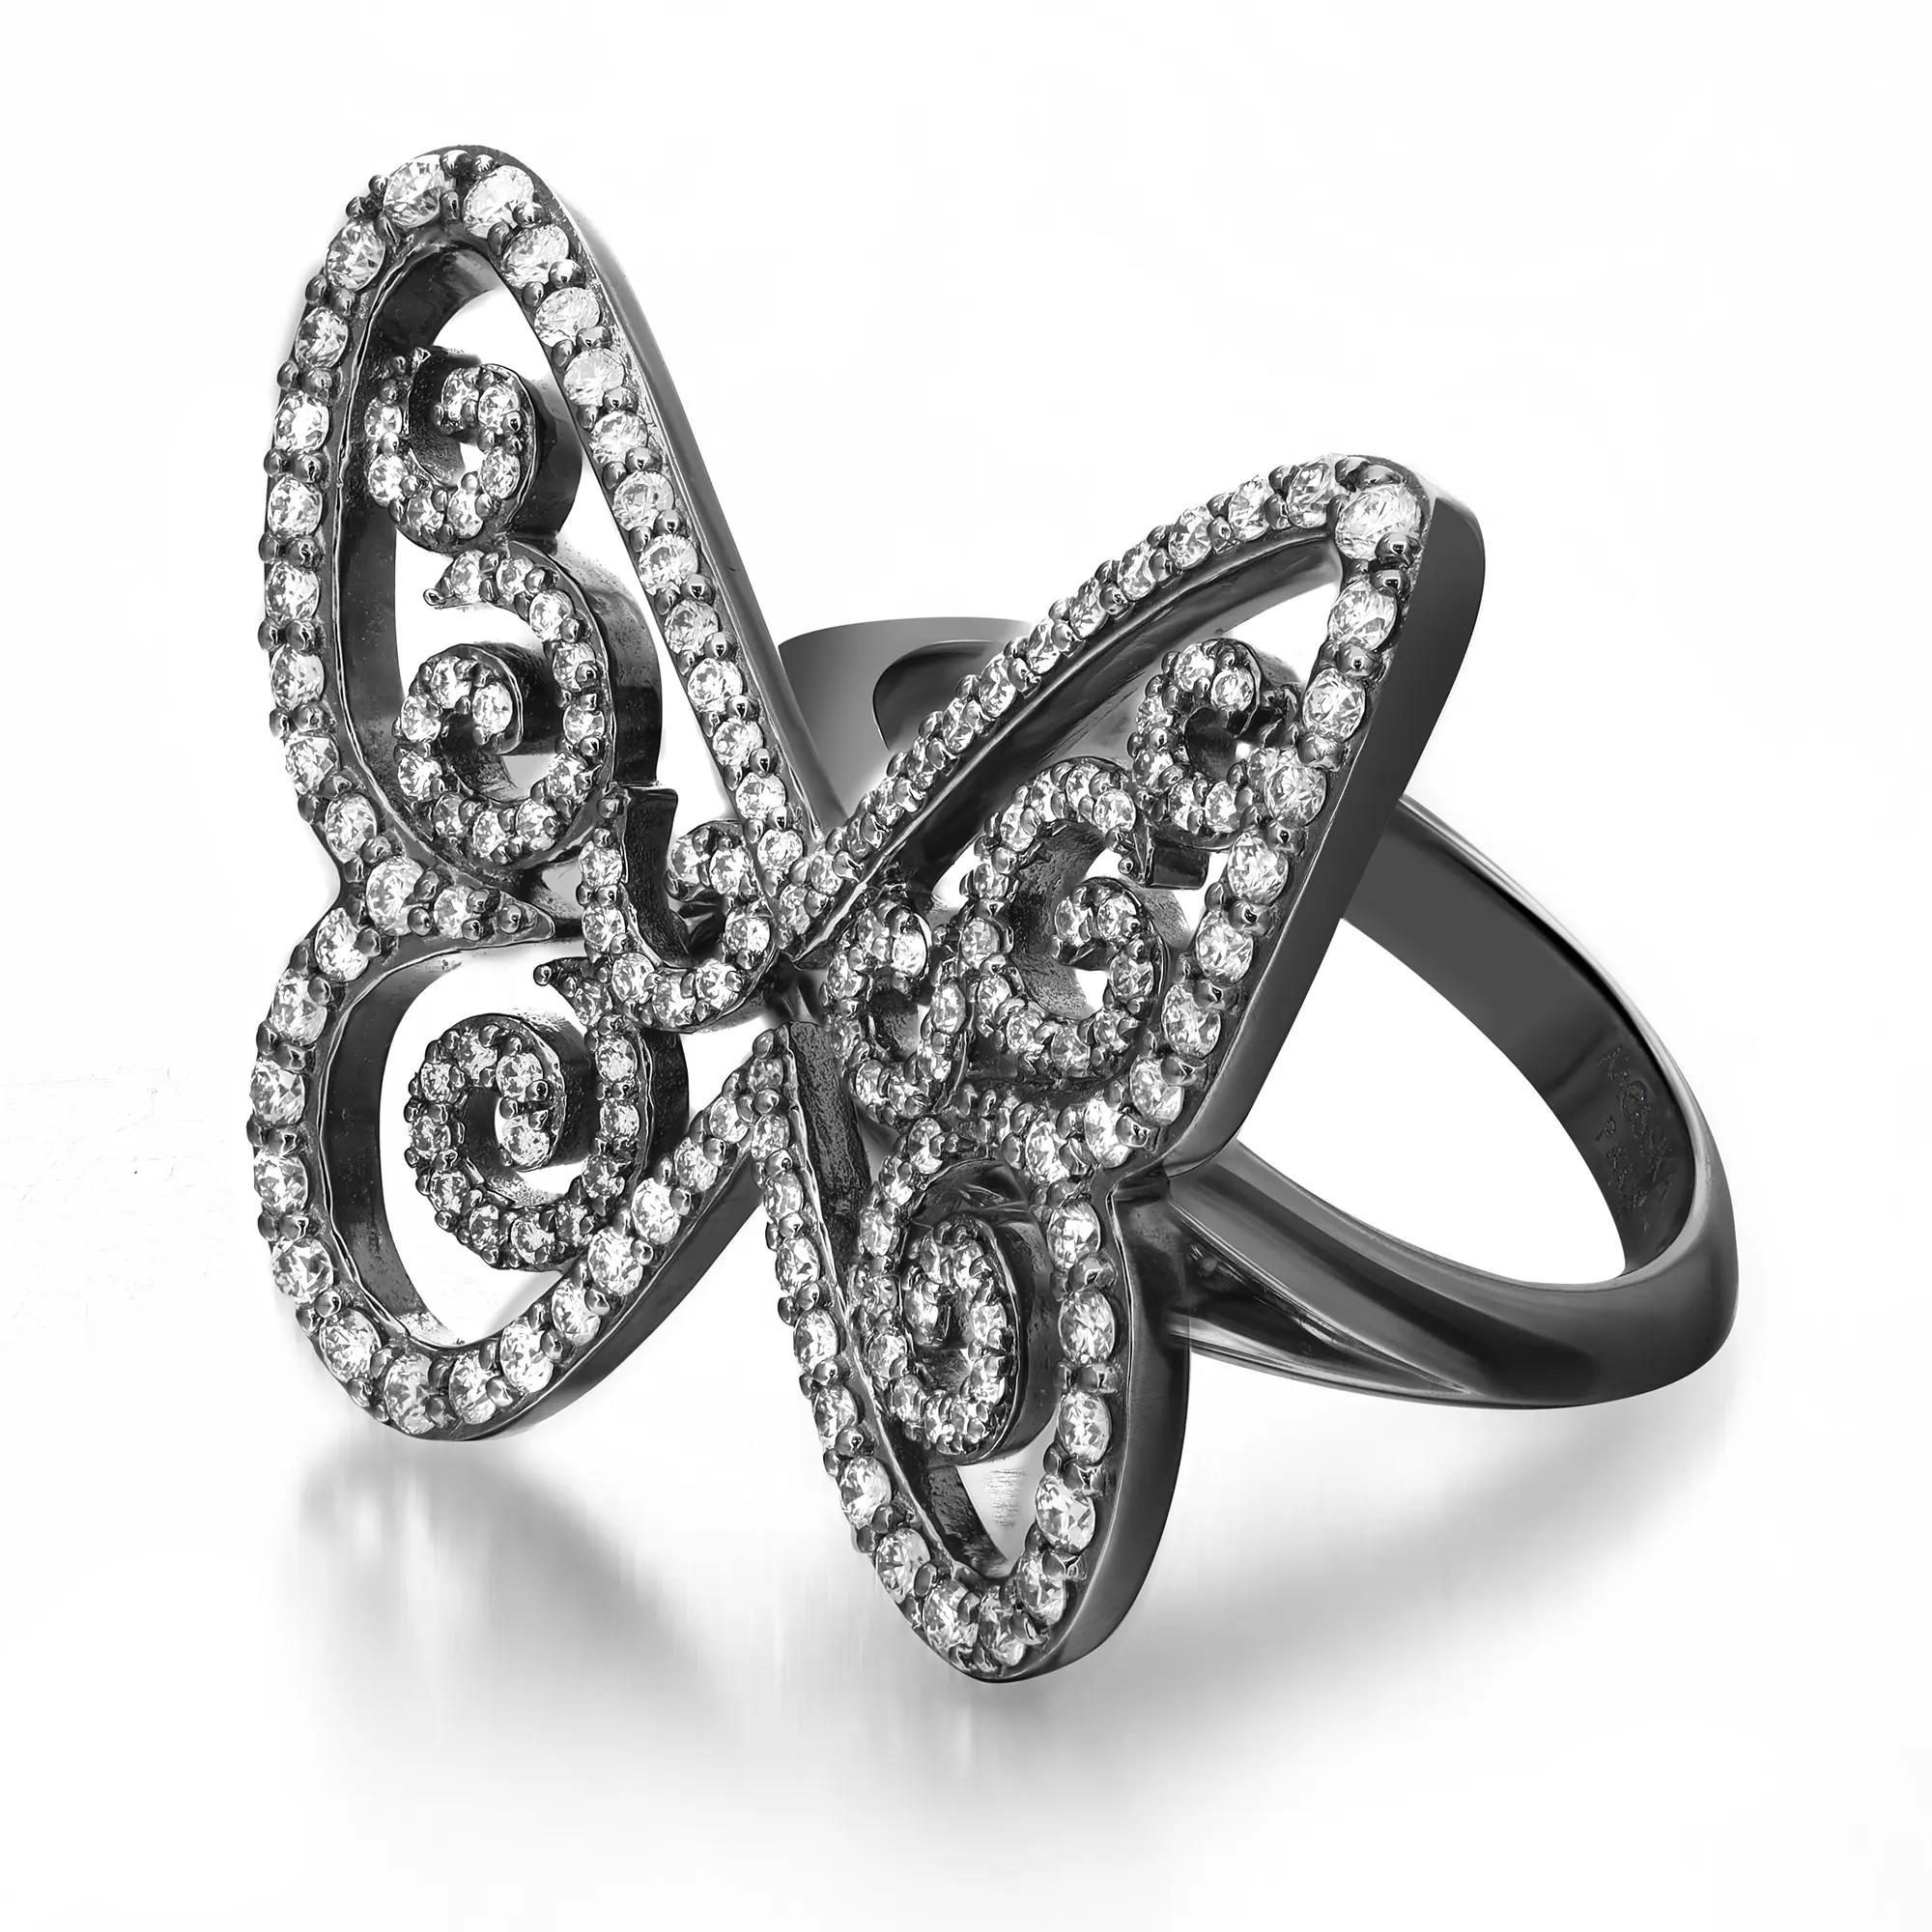 Bold and beautiful, Messika Butterfly Arabesque diamond ring. Crafted in 18K blackened white gold. Adorned with pave set round brilliant cut diamonds weighing 0.78 carat. Diamond color G and clarity VS. Ring size: 51 US 5.5. Top measurement: 26.7mm